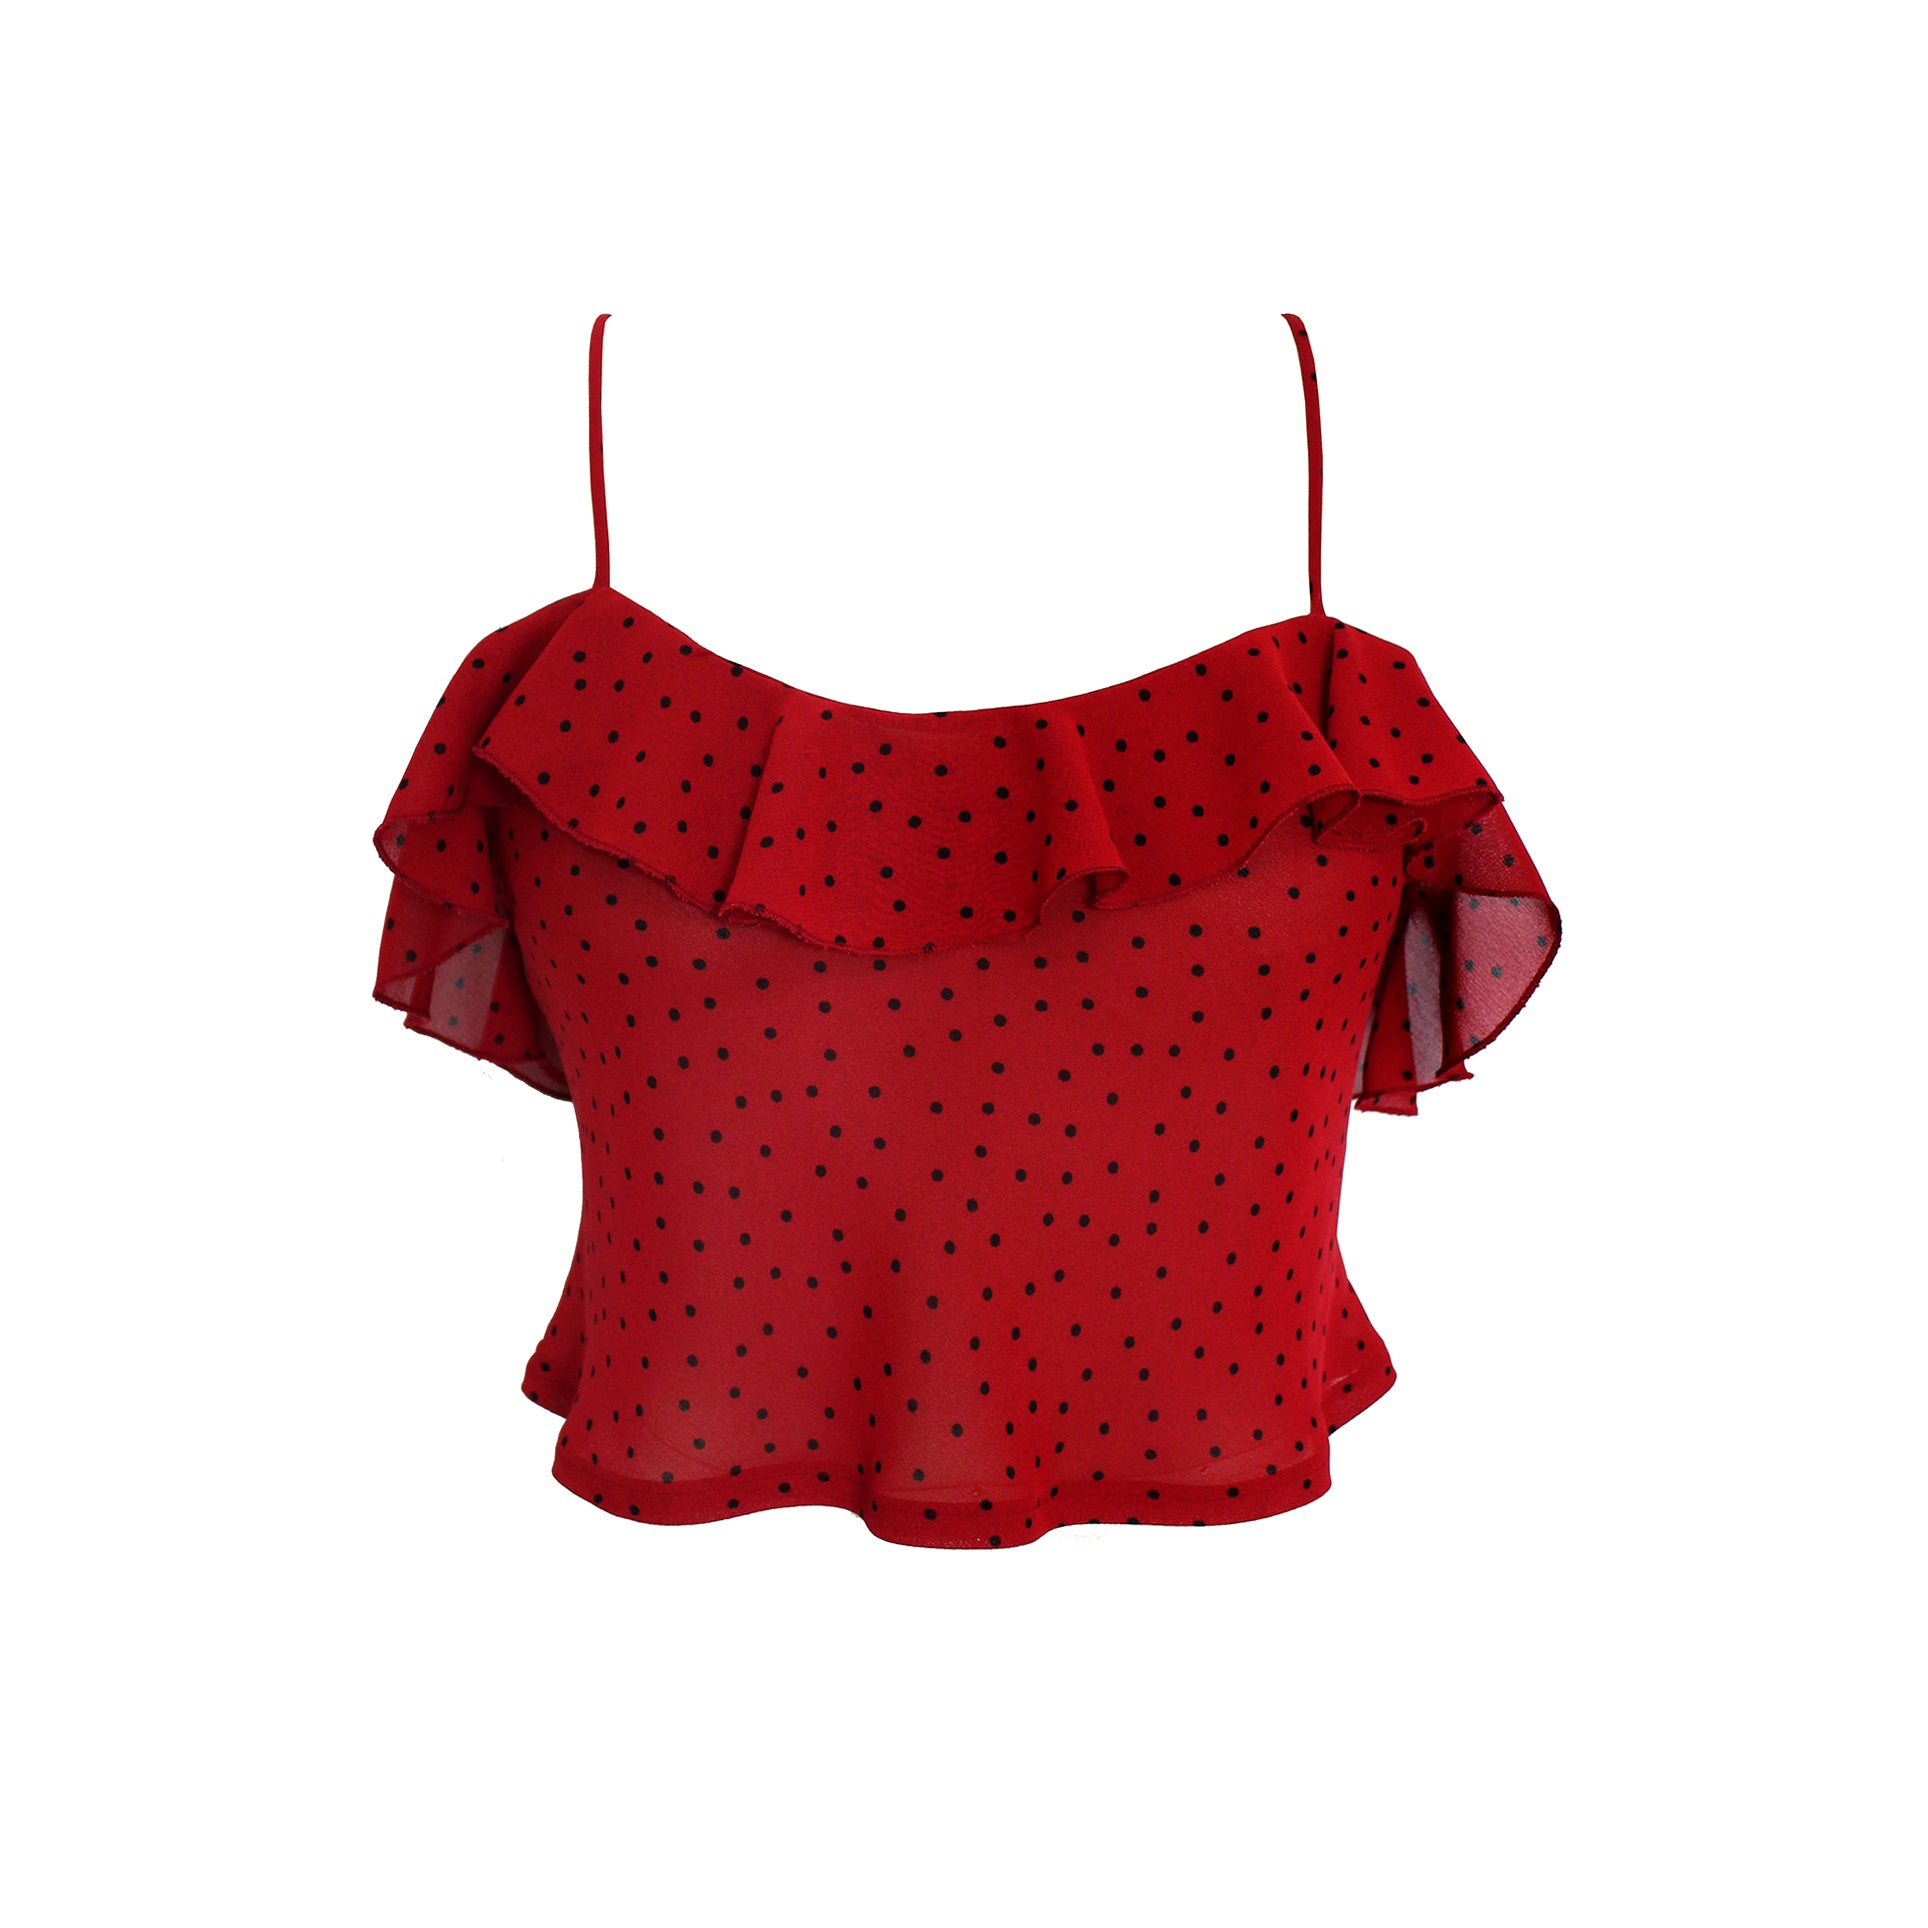 Red Polka Dot Camisole  Slow Fashion Made in Australia by